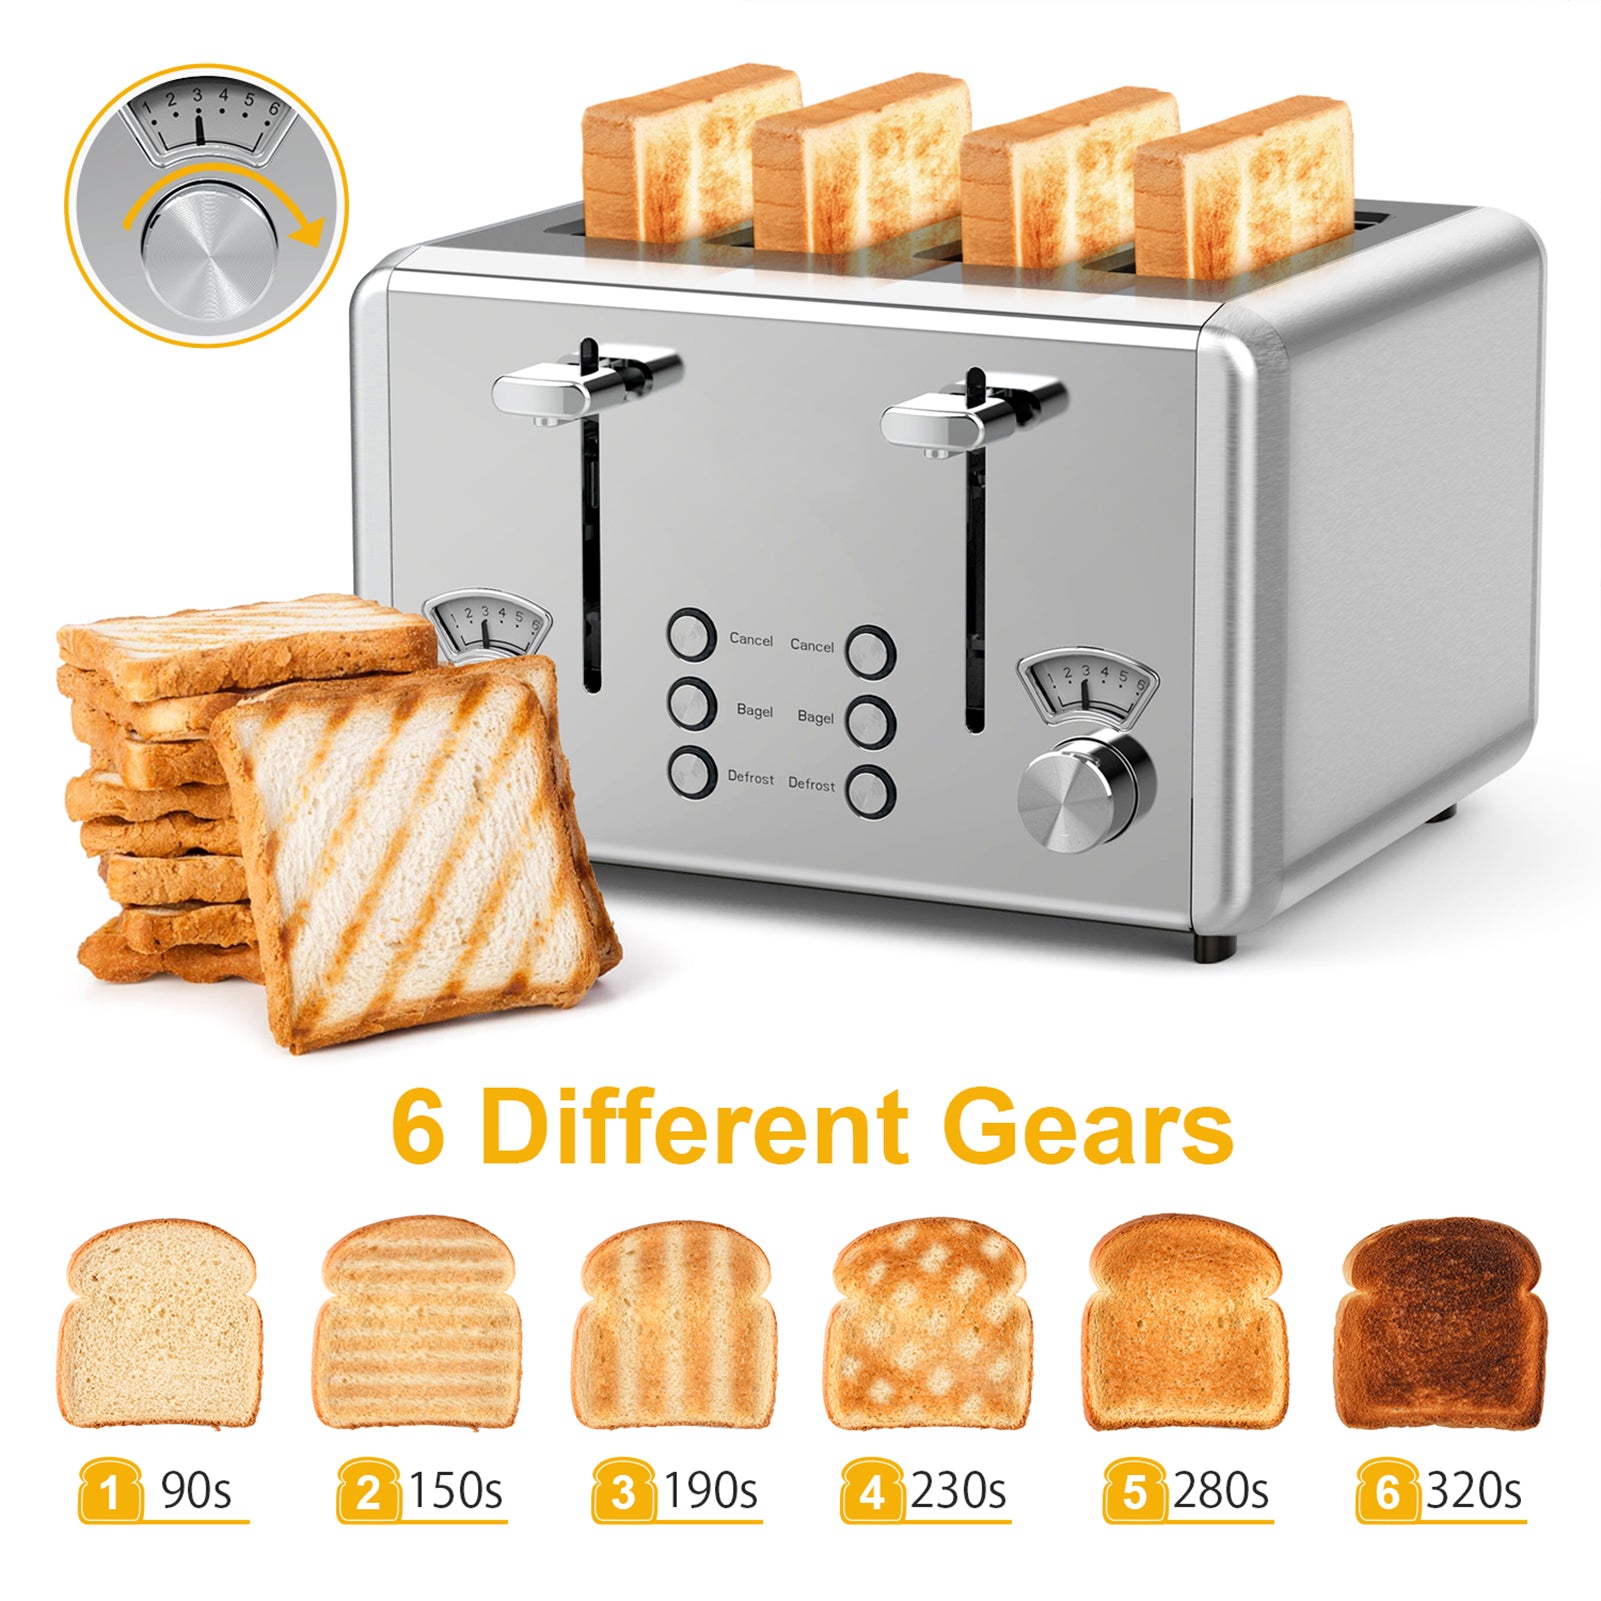 WHALL® Knob Toaster 4 Slice | Stainless Steel, Digital Timer, Sound | 6 Bread Types & Shades